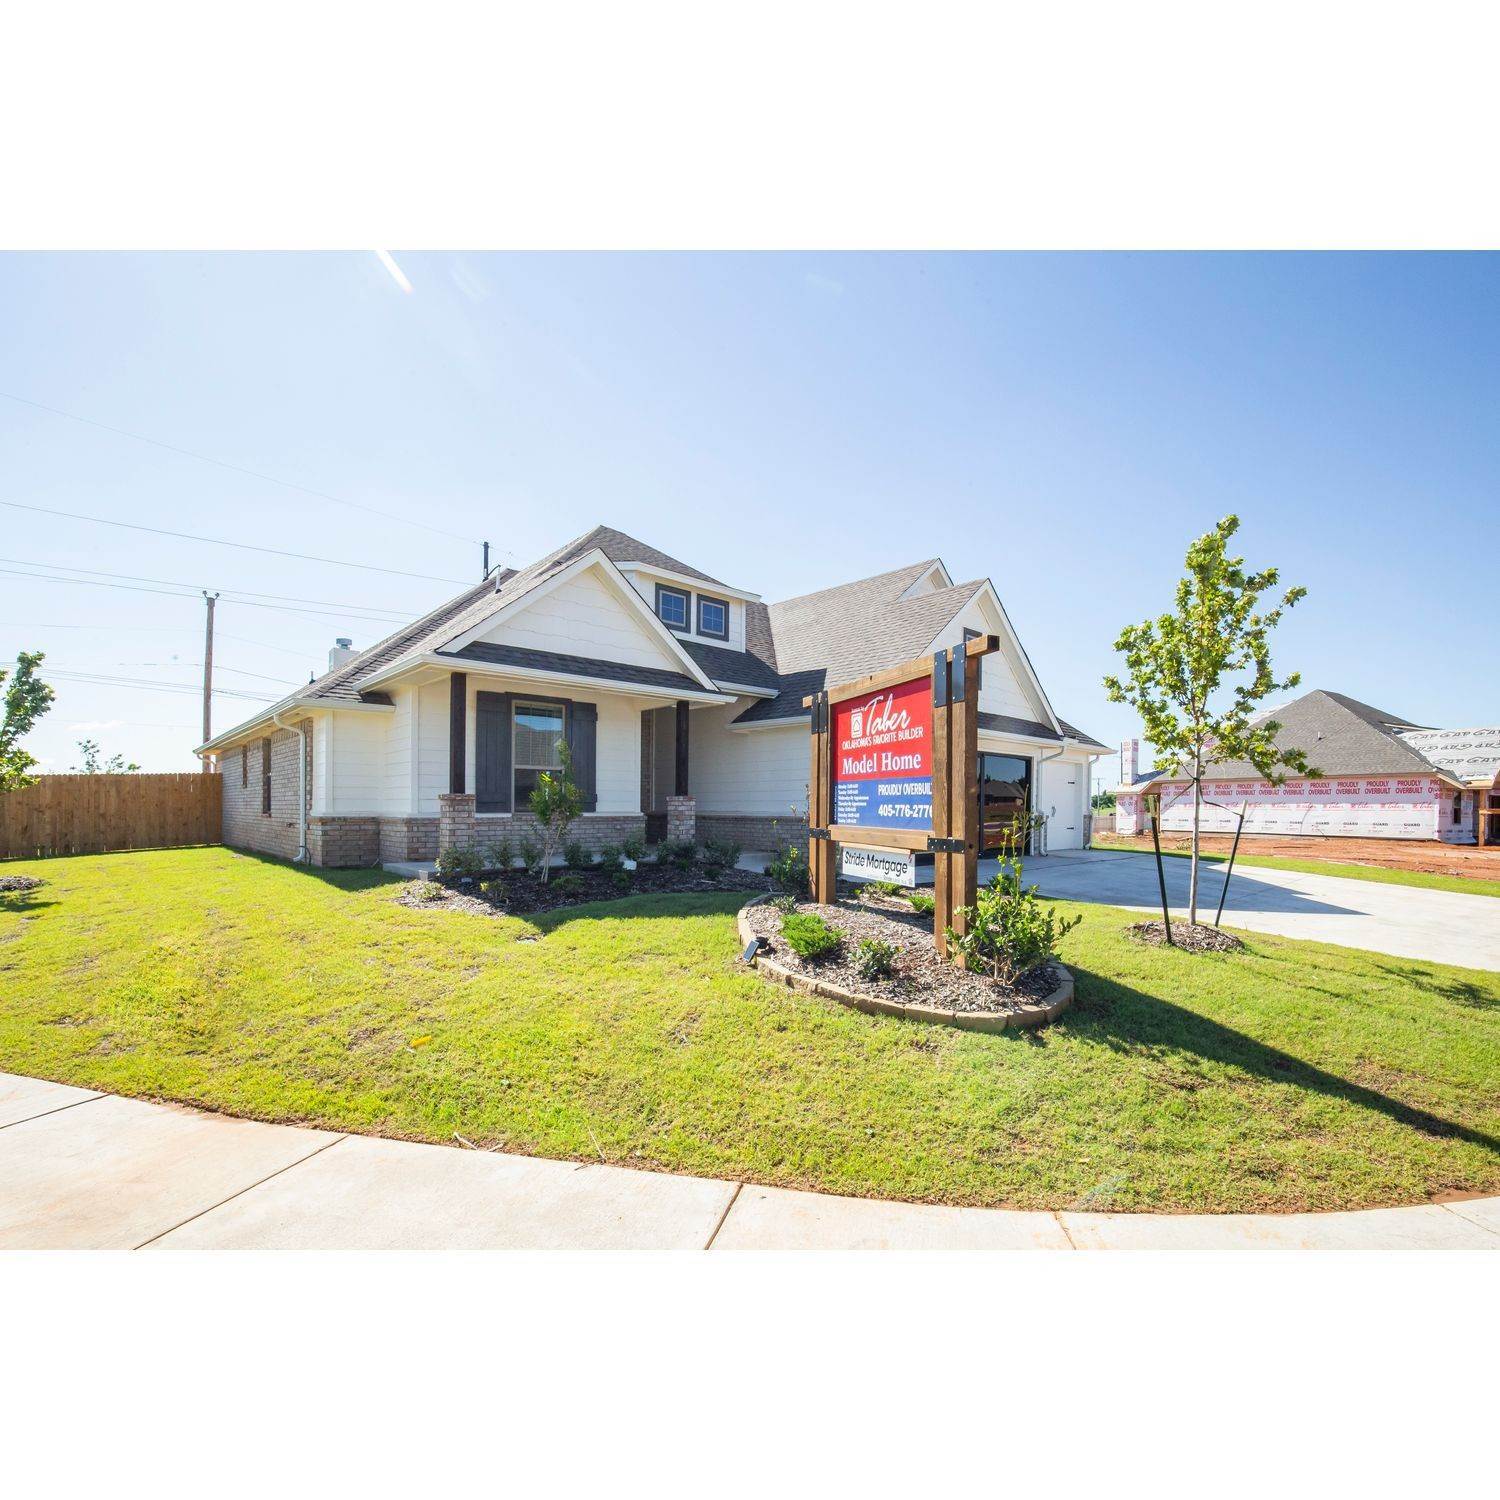 4. Broadmoore Heights building at 2800 Heather Haven, Moore, OK 73160